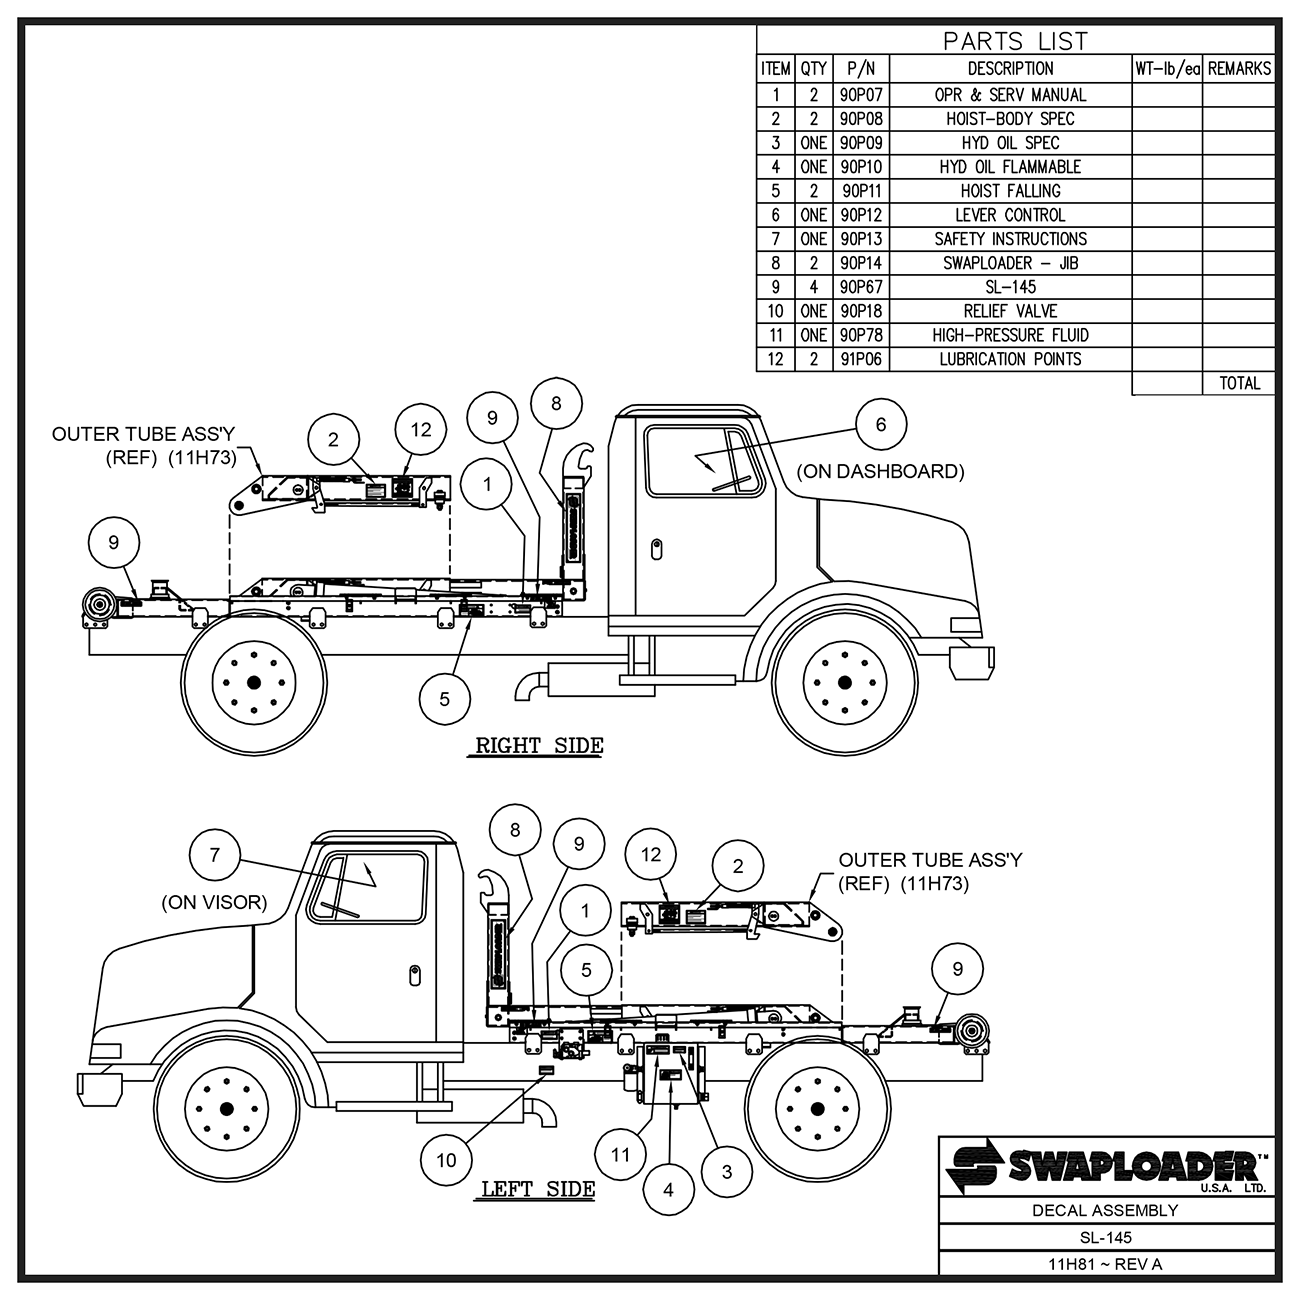 Swaploader SL-145 Decal Assembly Diagram